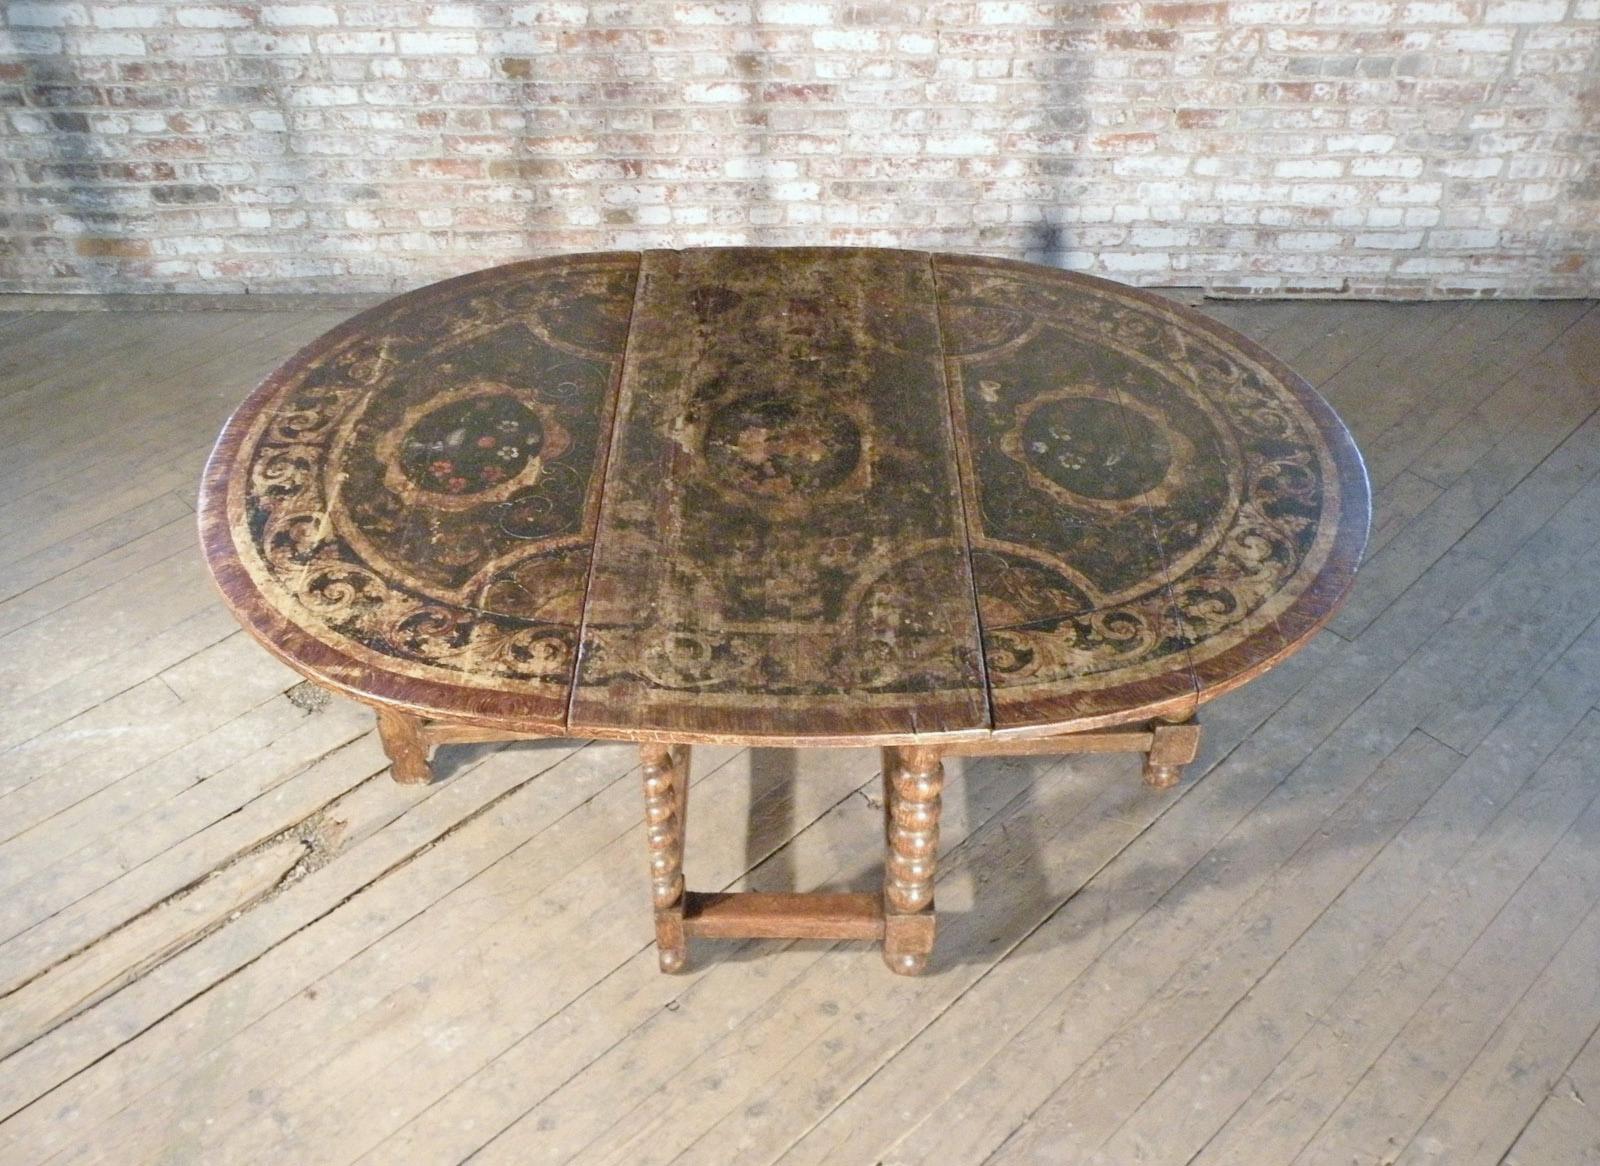 A charming Dutch Gate-Leg Table in original condition. The painted surfaces beautifully worn, the top with typical baroque scrolling foliage borders and floral center fields, the base faux-grain painted. Bobbin-turned legs with swing-out mechanism